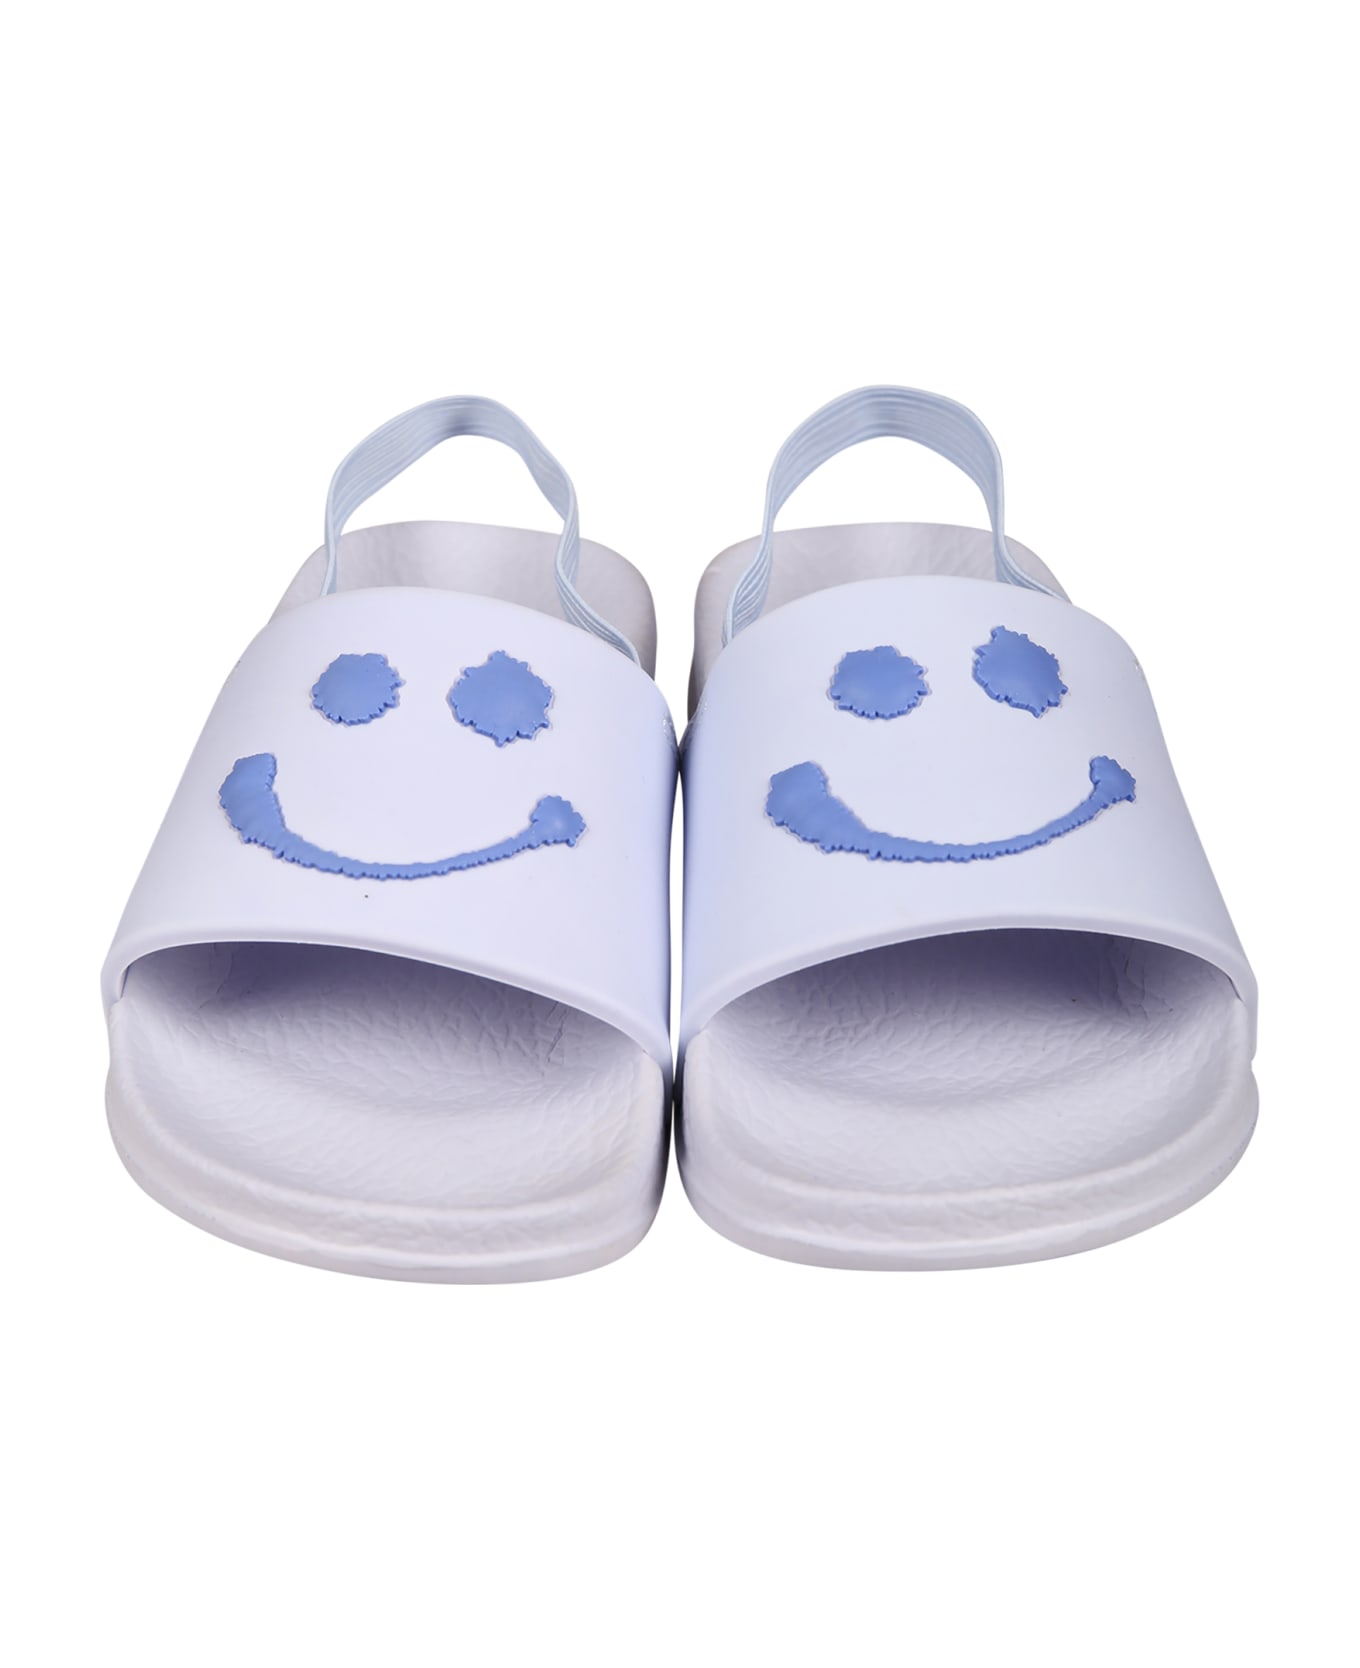 Molo Light Blue Slippers For Babykids With Smiley - Light Blue シューズ